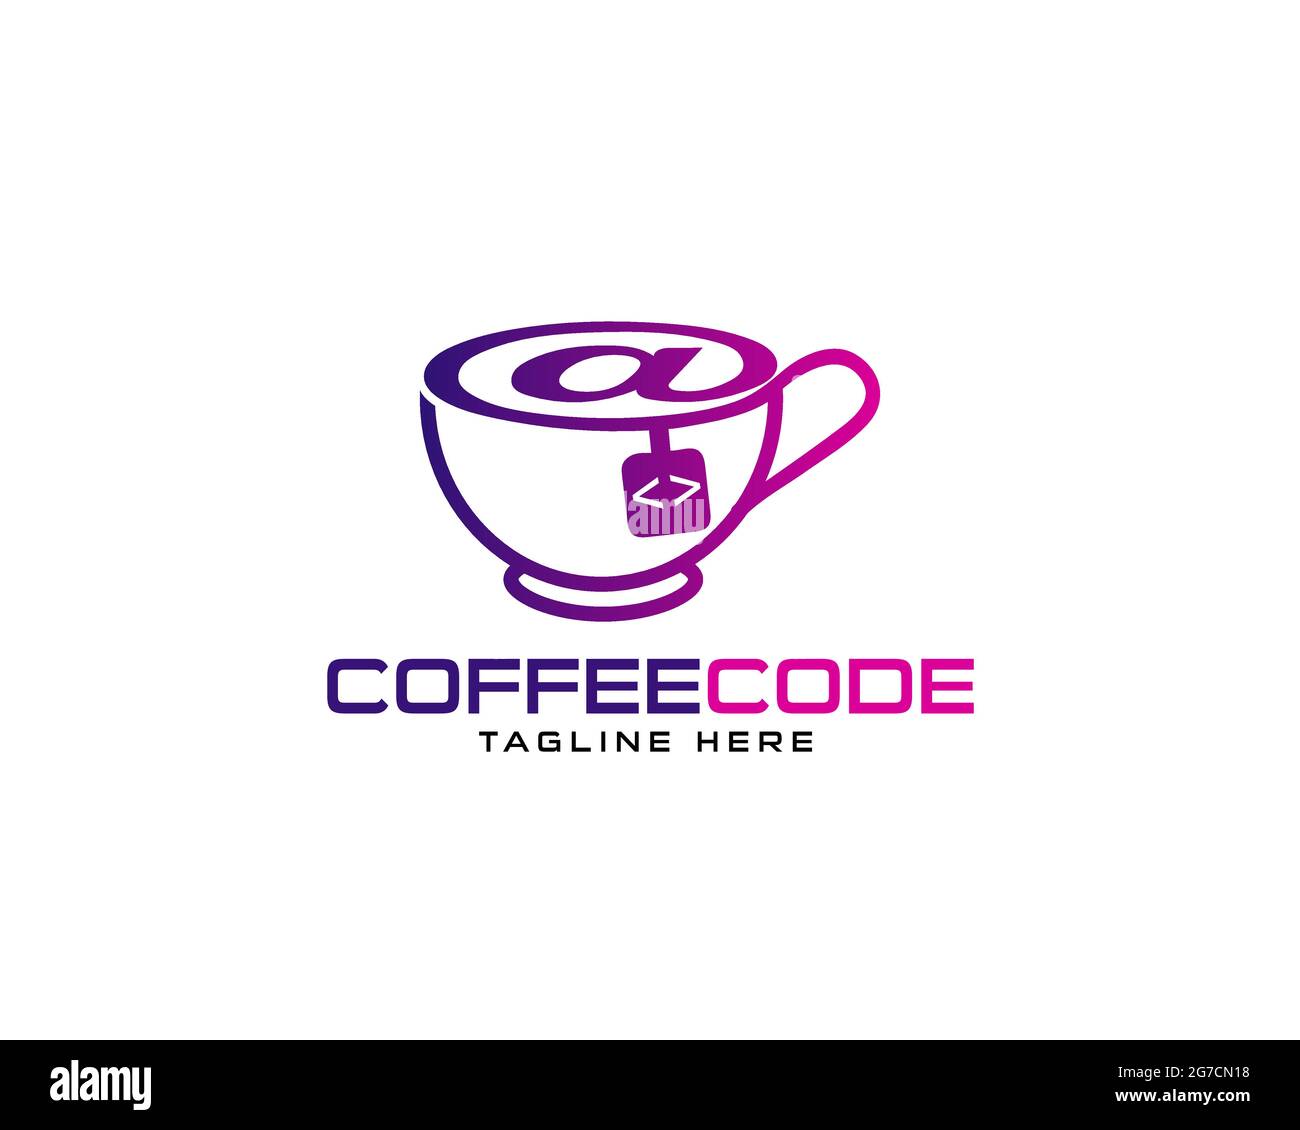 Coffee code Logo design can be used as sign, icon or symbol, full layered vector and easy to edit and customize size and color, compatible with almost Stock Vector